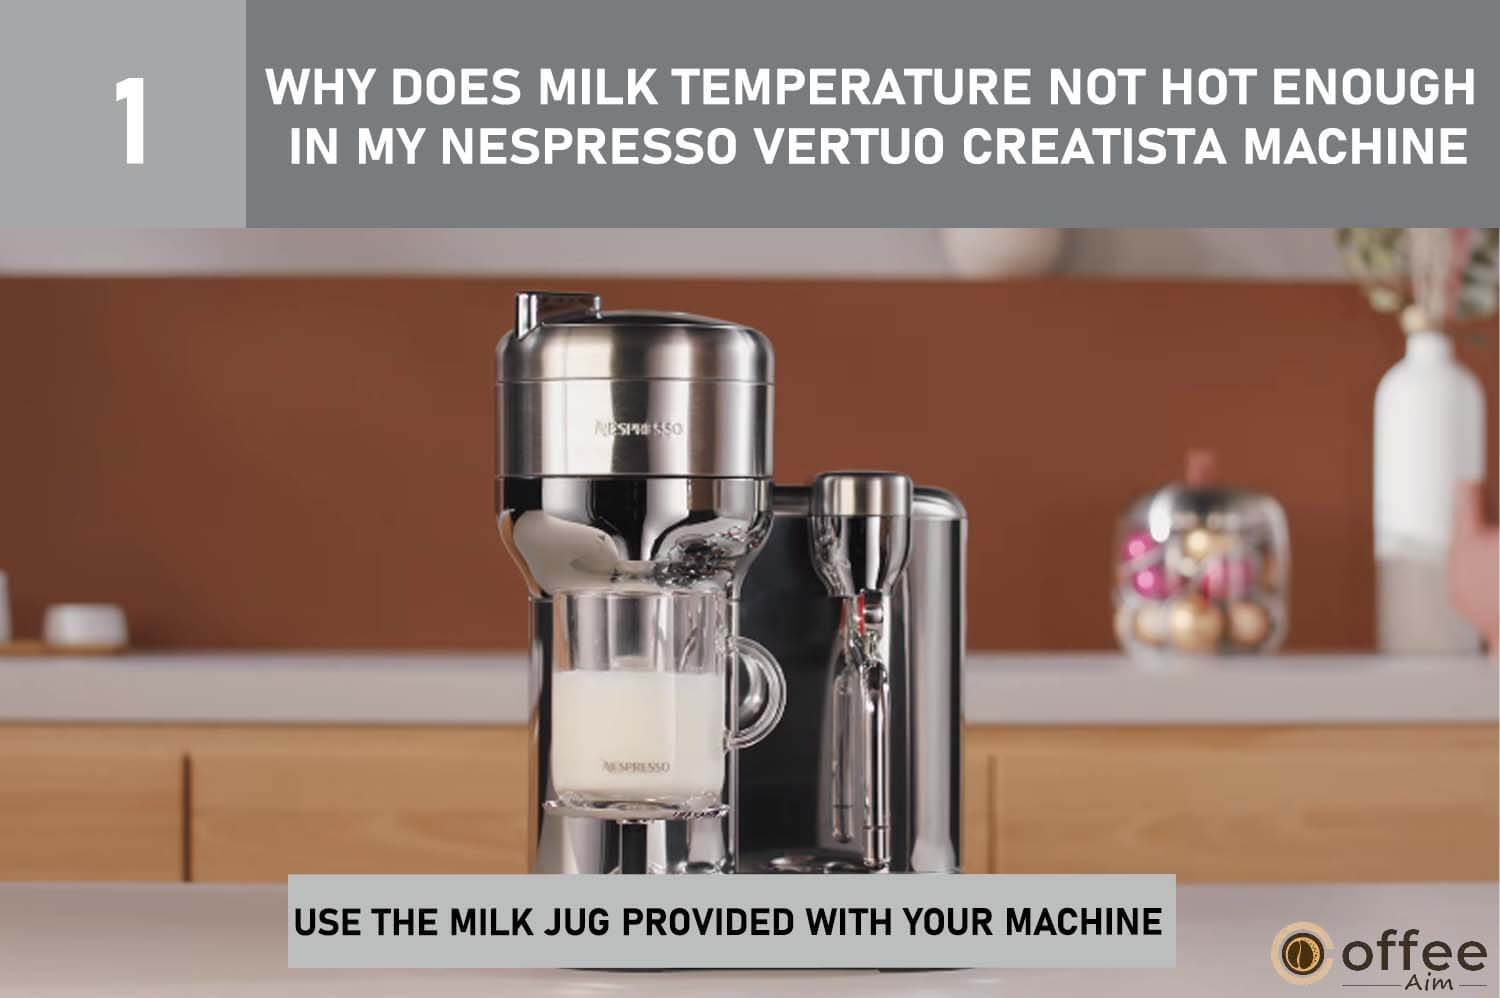 For the "Nespresso Vertuo Creatista Not Working" article, use the included milk jug to address insufficient milk temperature.